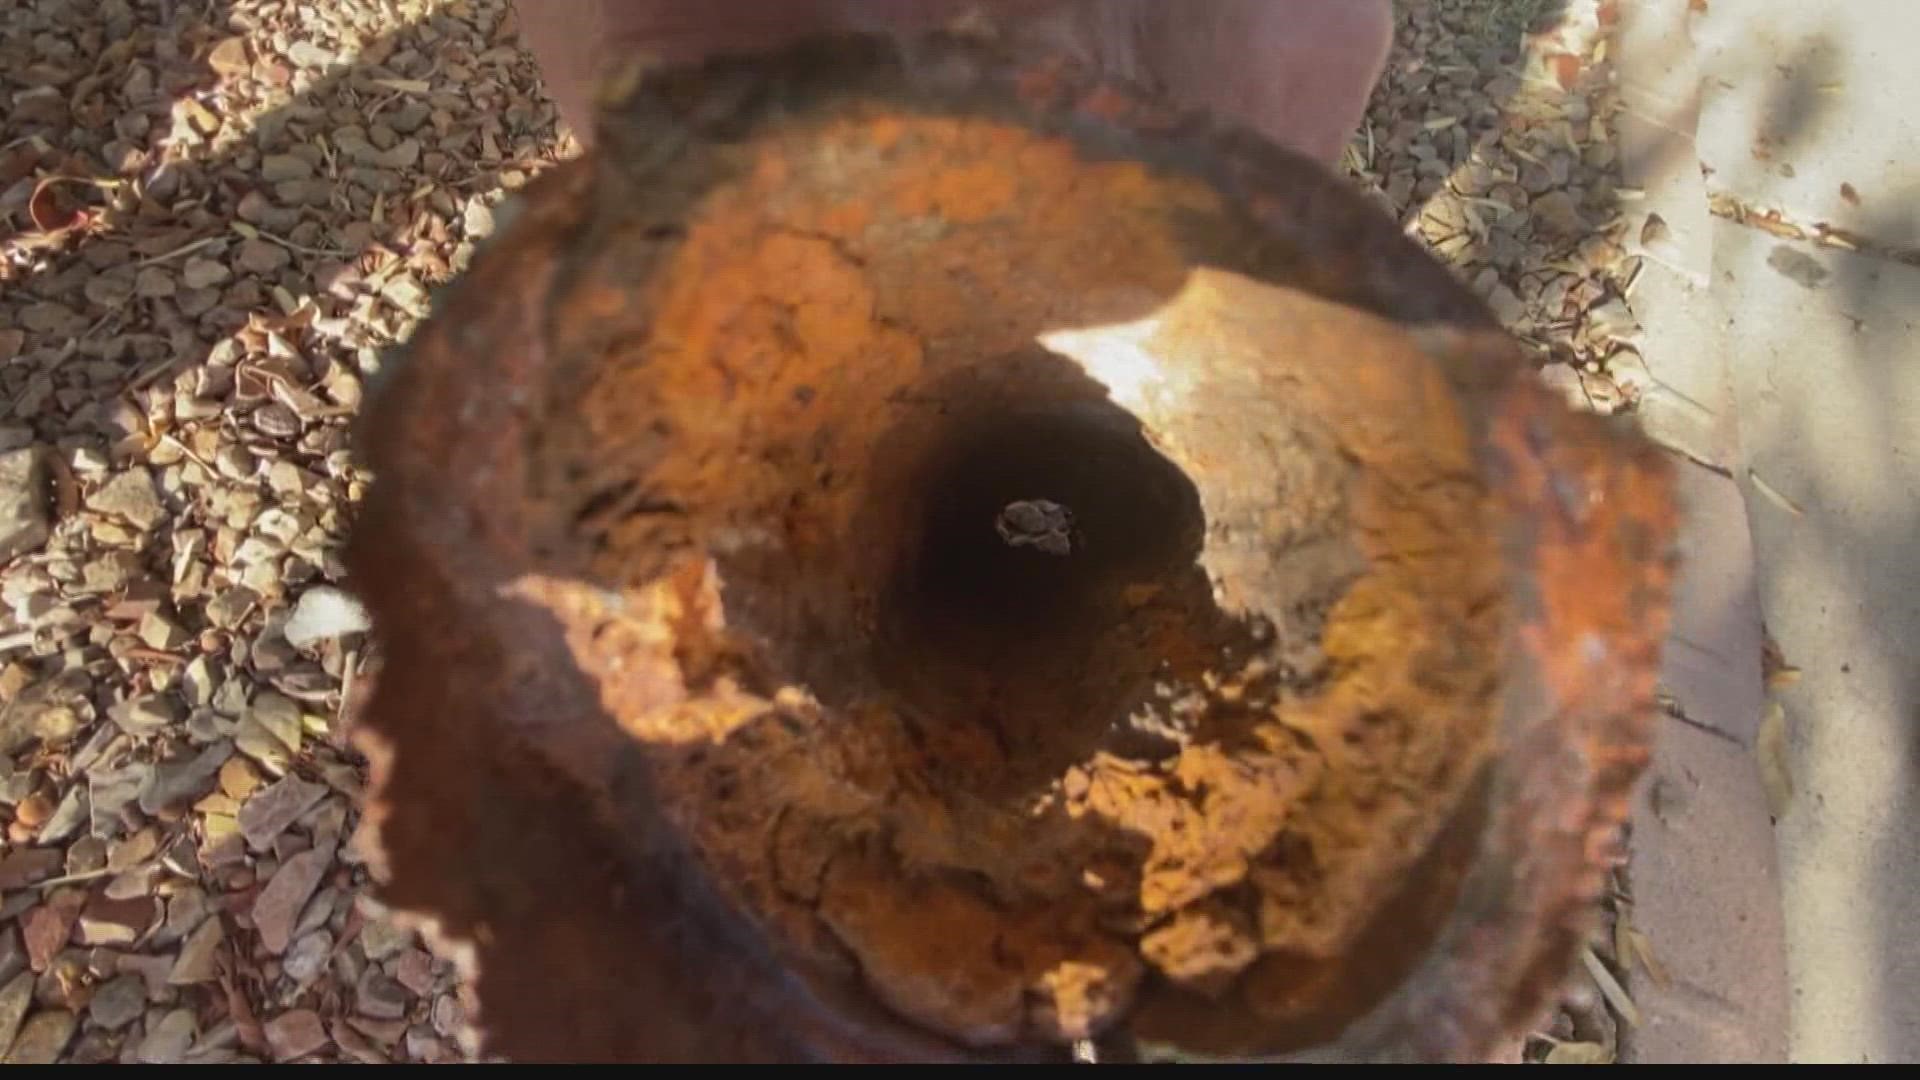 Thousands of the Tempe homes could have critically-deteriorated sewage pipes underneath them, according to a map provided by the city.